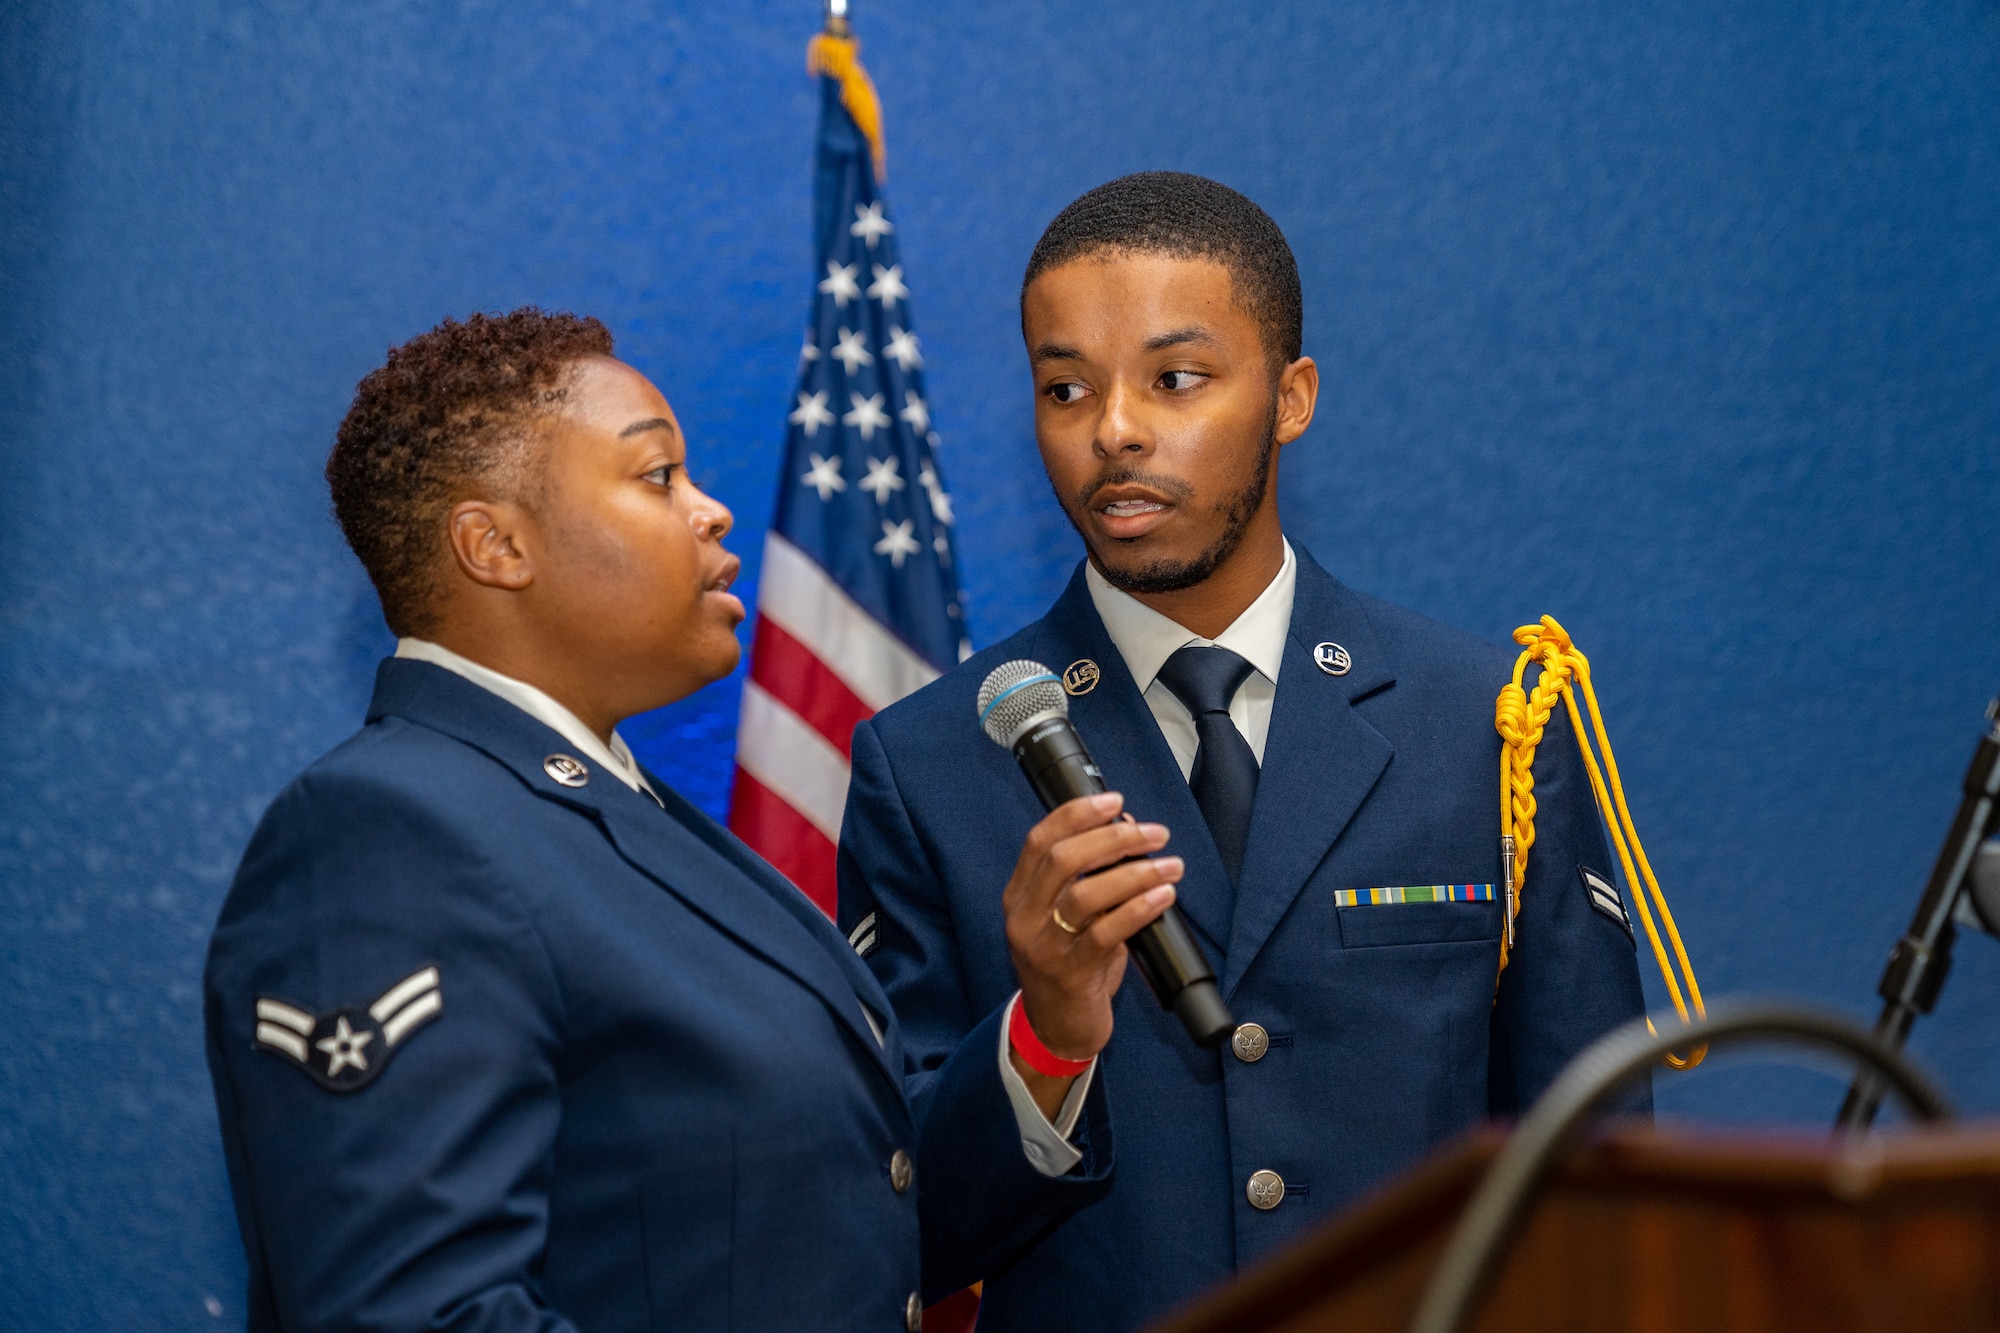 U.S. Air Force Airman 1st Class Josiah Forbes Hart and Airman 1st Class Genesis Mason, 338th Training Squadron cyber network students, sing the National Anthem during the Airman’s Ball at Keesler Air Force Base, Mississippi, Sept. 14, 2023.